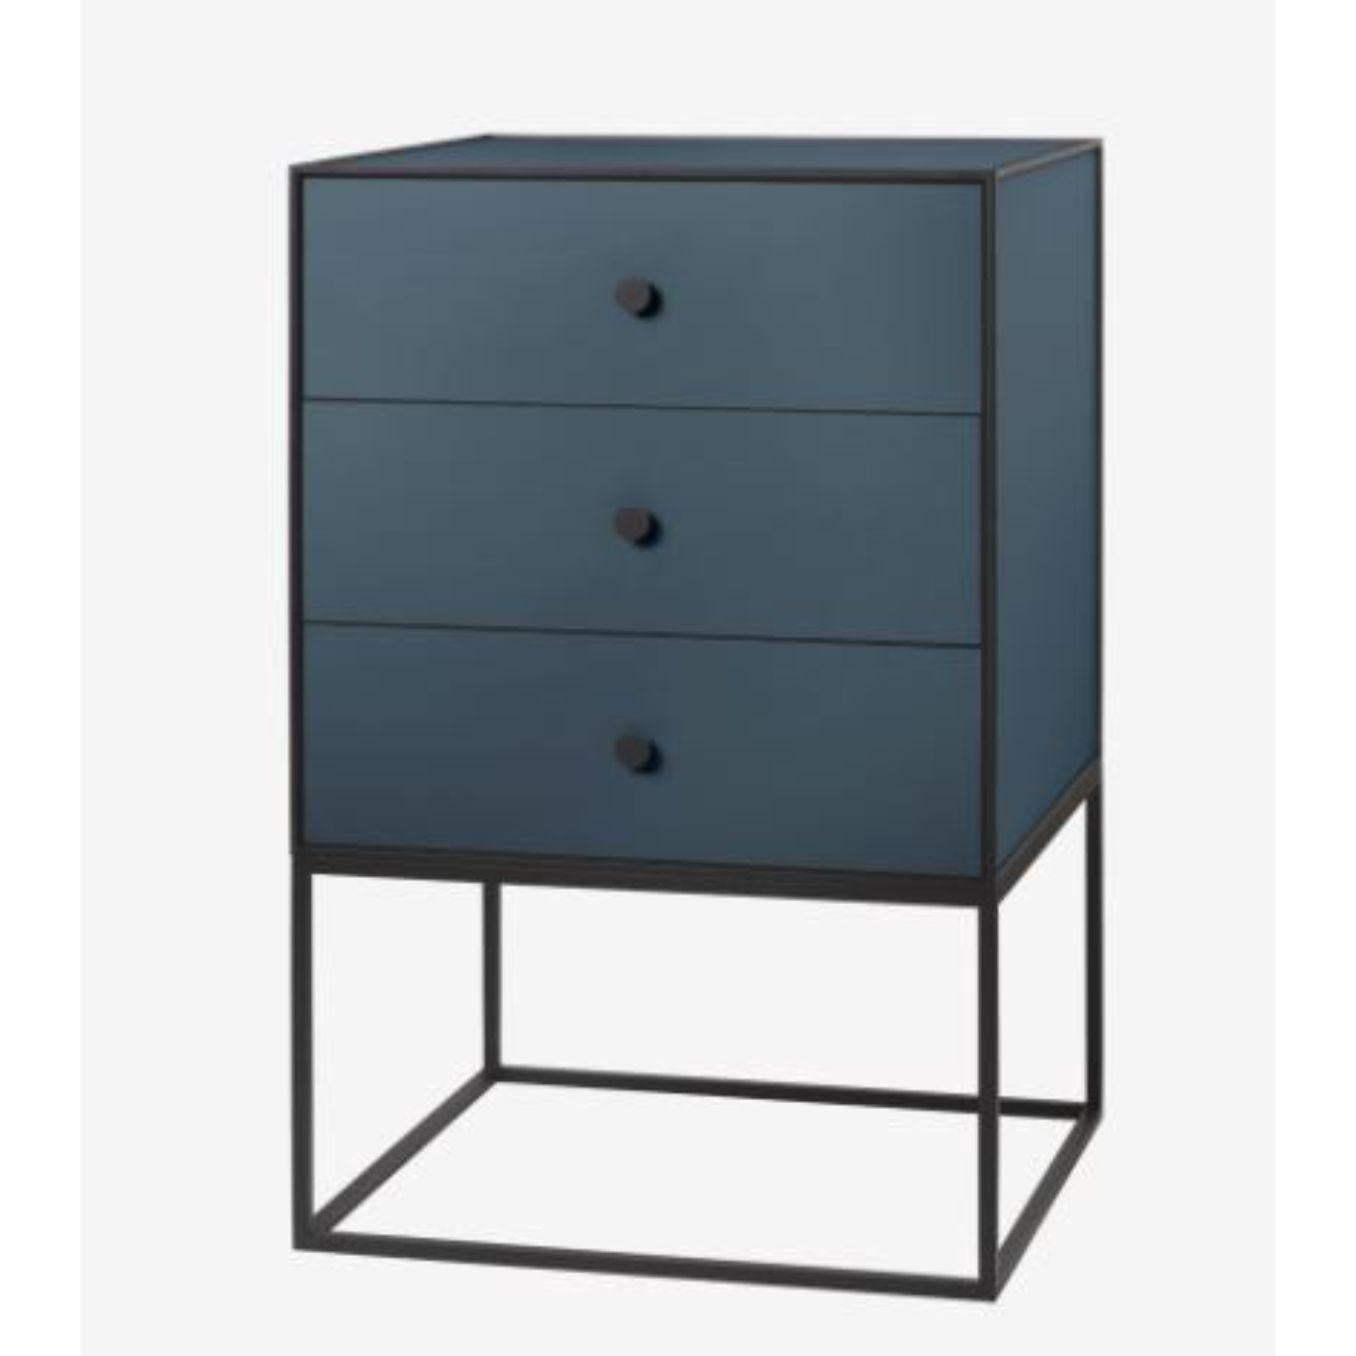 49 Fjord frame sideboard with 3 drawers by Lassen
Dimensions: D 49 x W 42 x H 77 cm 
Materials: finér, melamin, melamine, metal, veneer
Also available in different colors and dimensions. 
Weight: 21 Kg

By Lassen is a Danish design brand